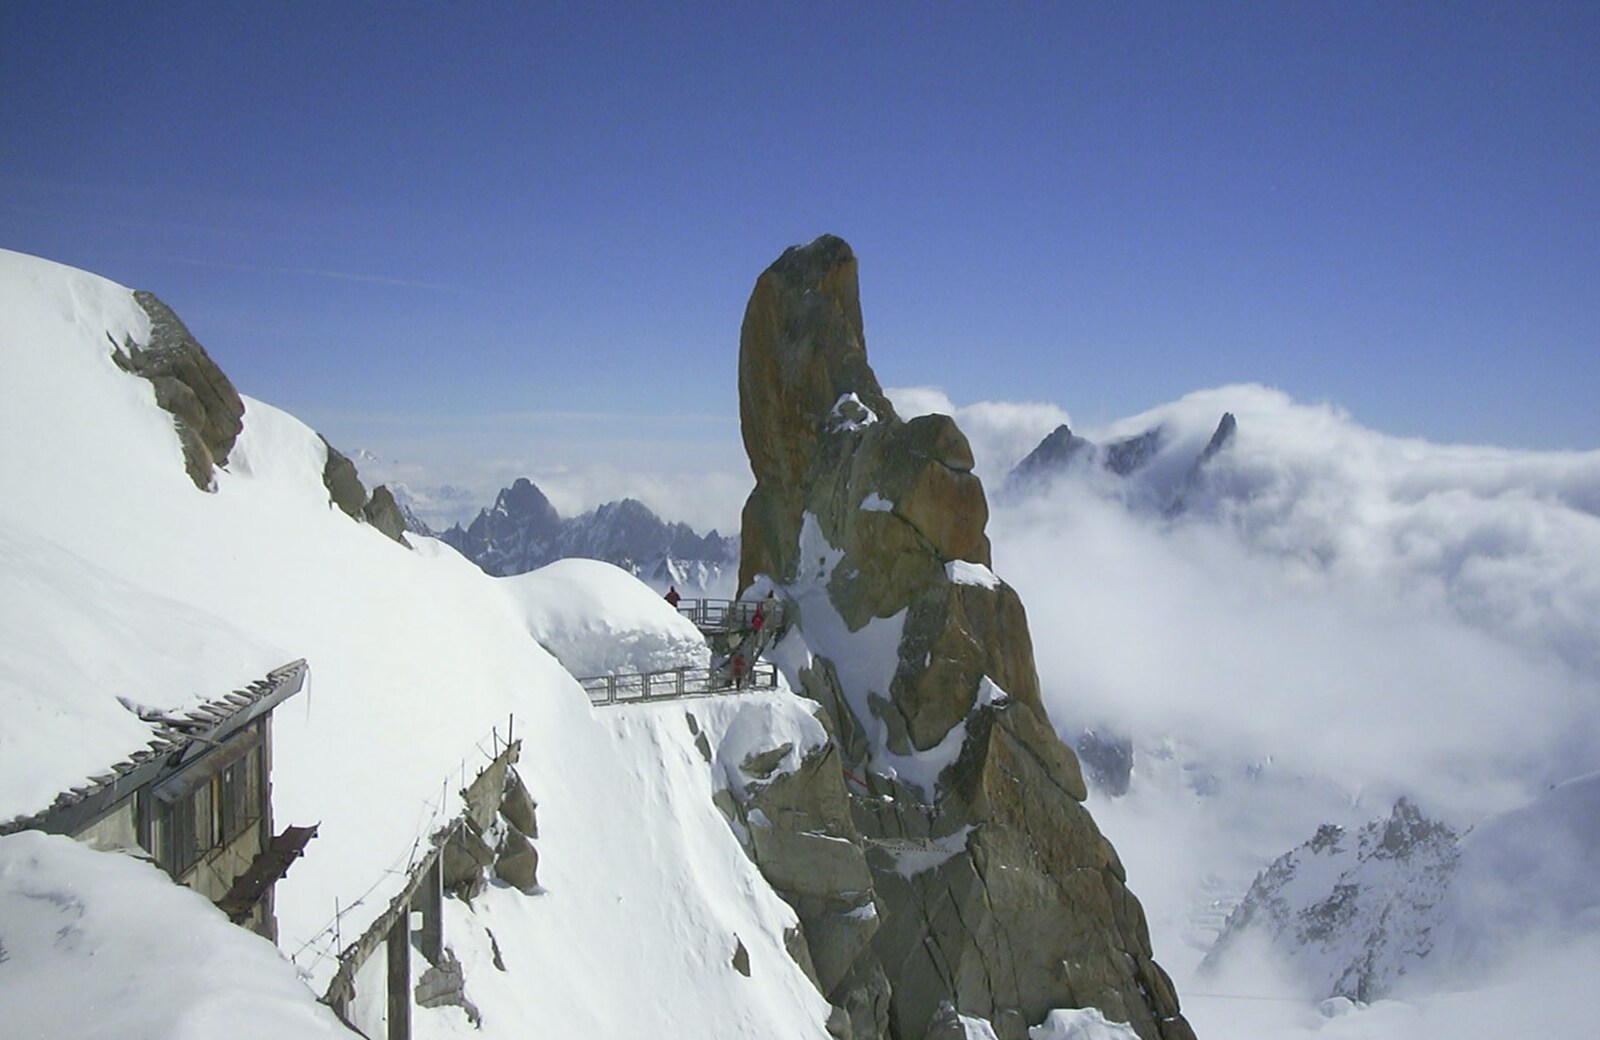 A curious rock outcrop from 3G Lab Goes Skiing In Chamonix, France - 12th March 2002